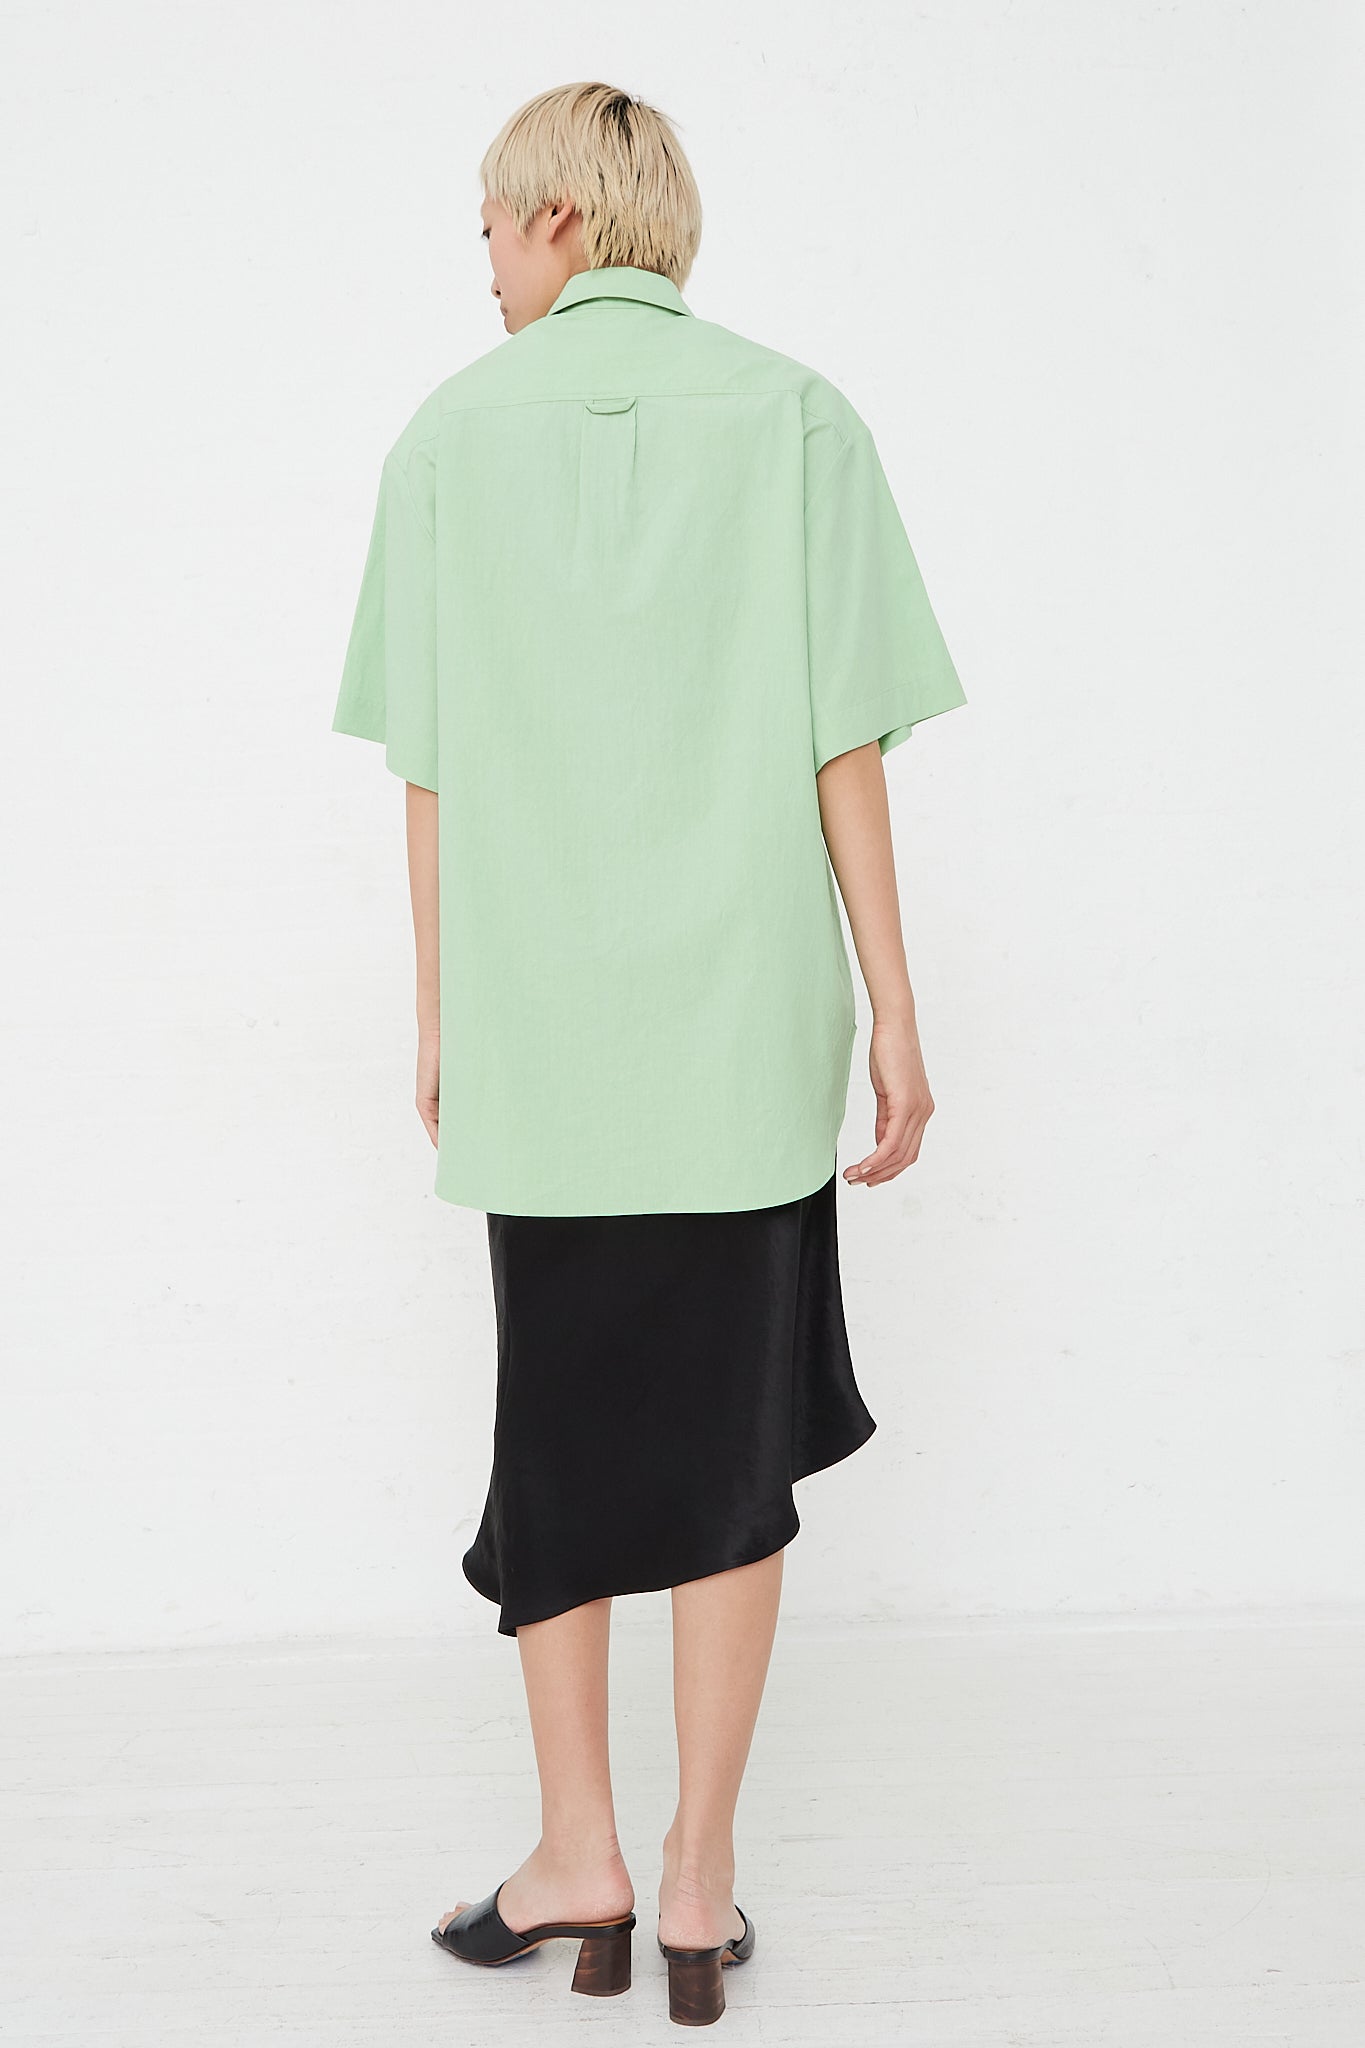 Nomia - Oversized Short Sleeve Shirt in Chlorophyll back view